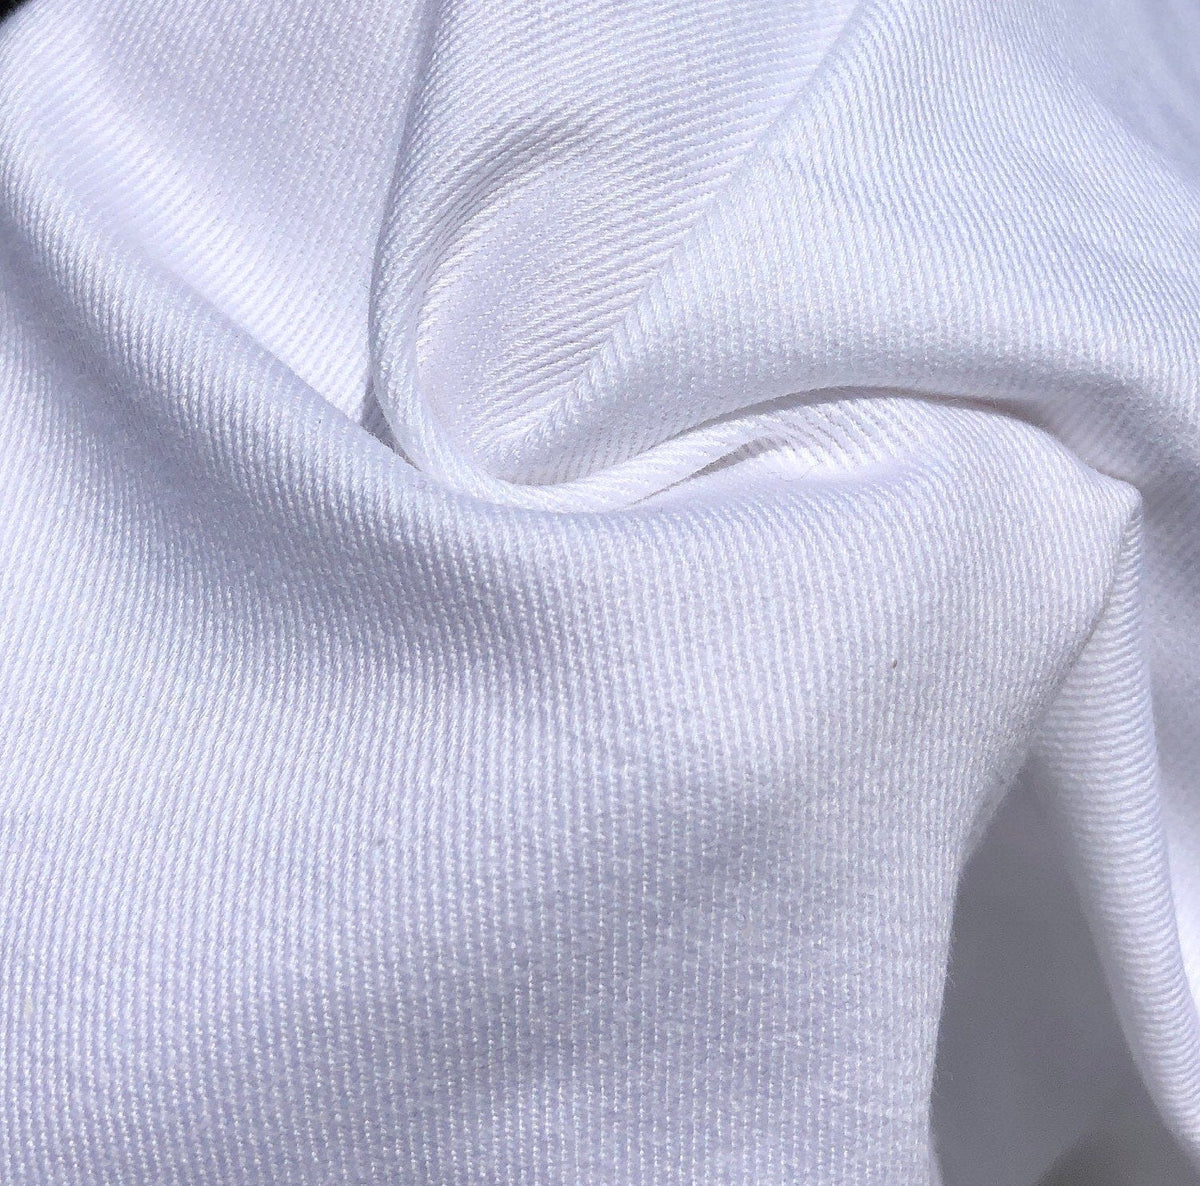 60 100% Organic Cotton Twill 7 OZ White Apparel & Face Mask Woven Fabric  By the Yard